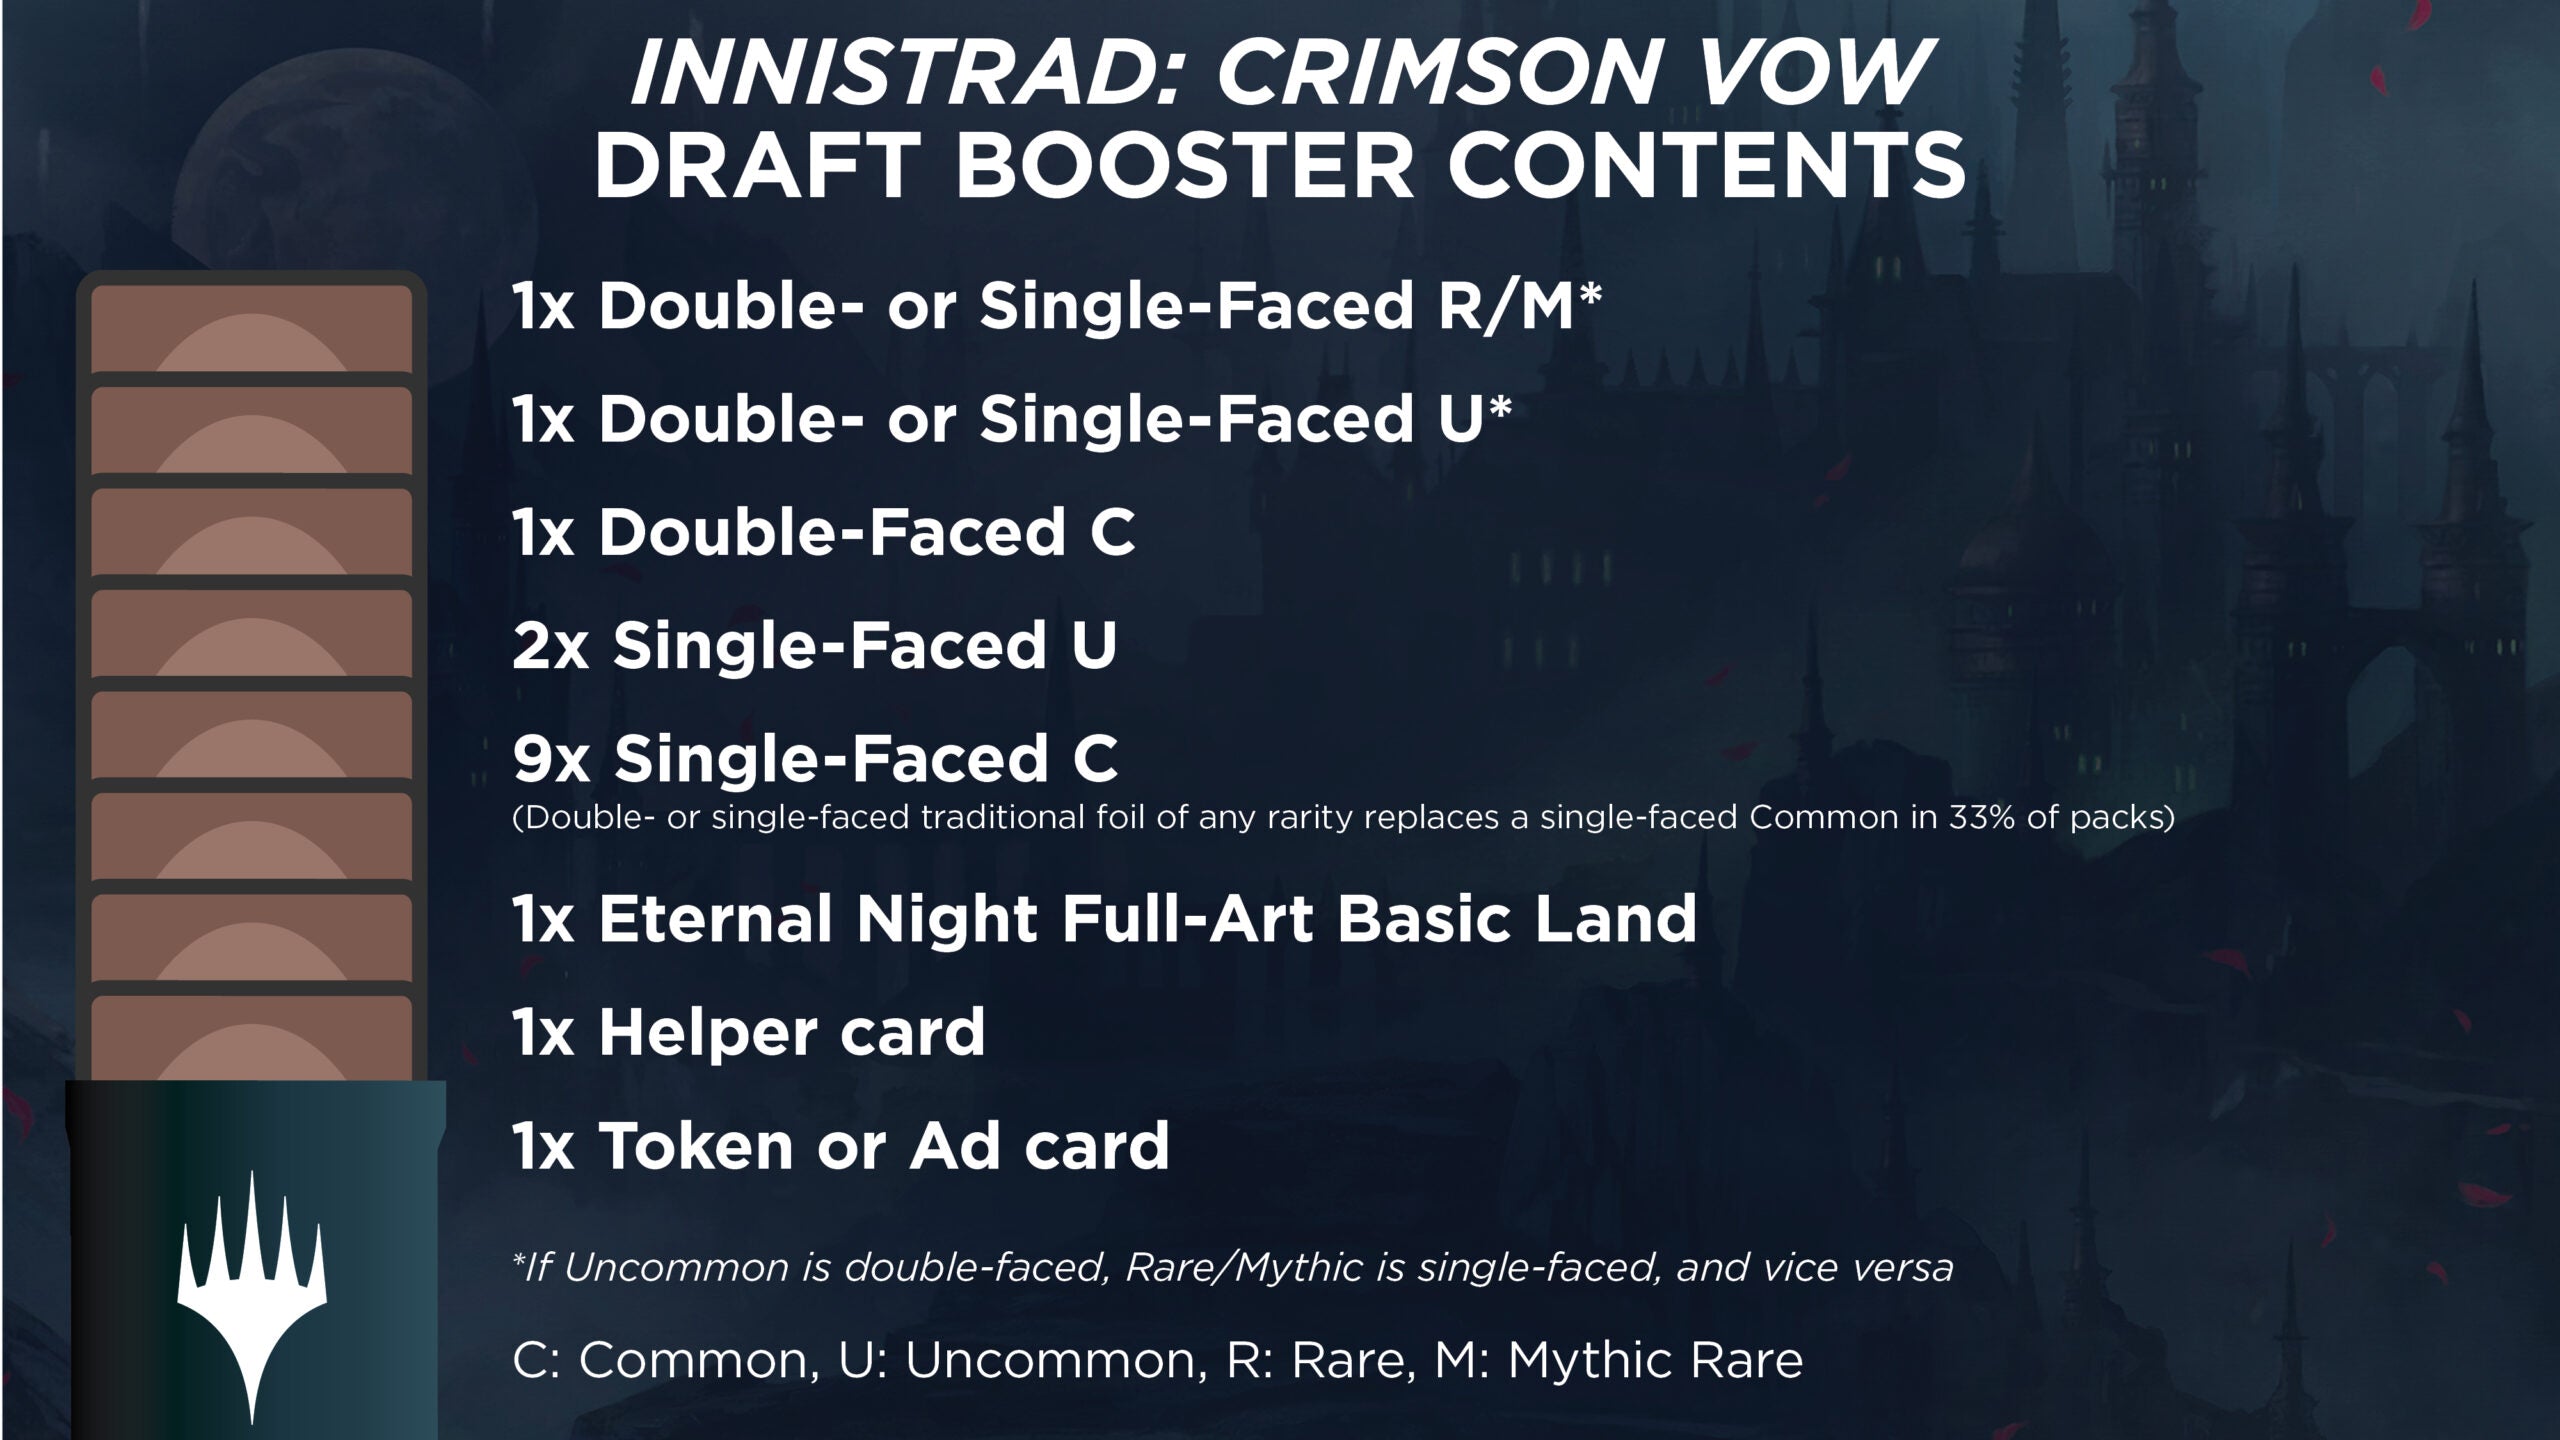 Magic the Gathering - Innistrad: Crimson Vow - Draft Booster Box